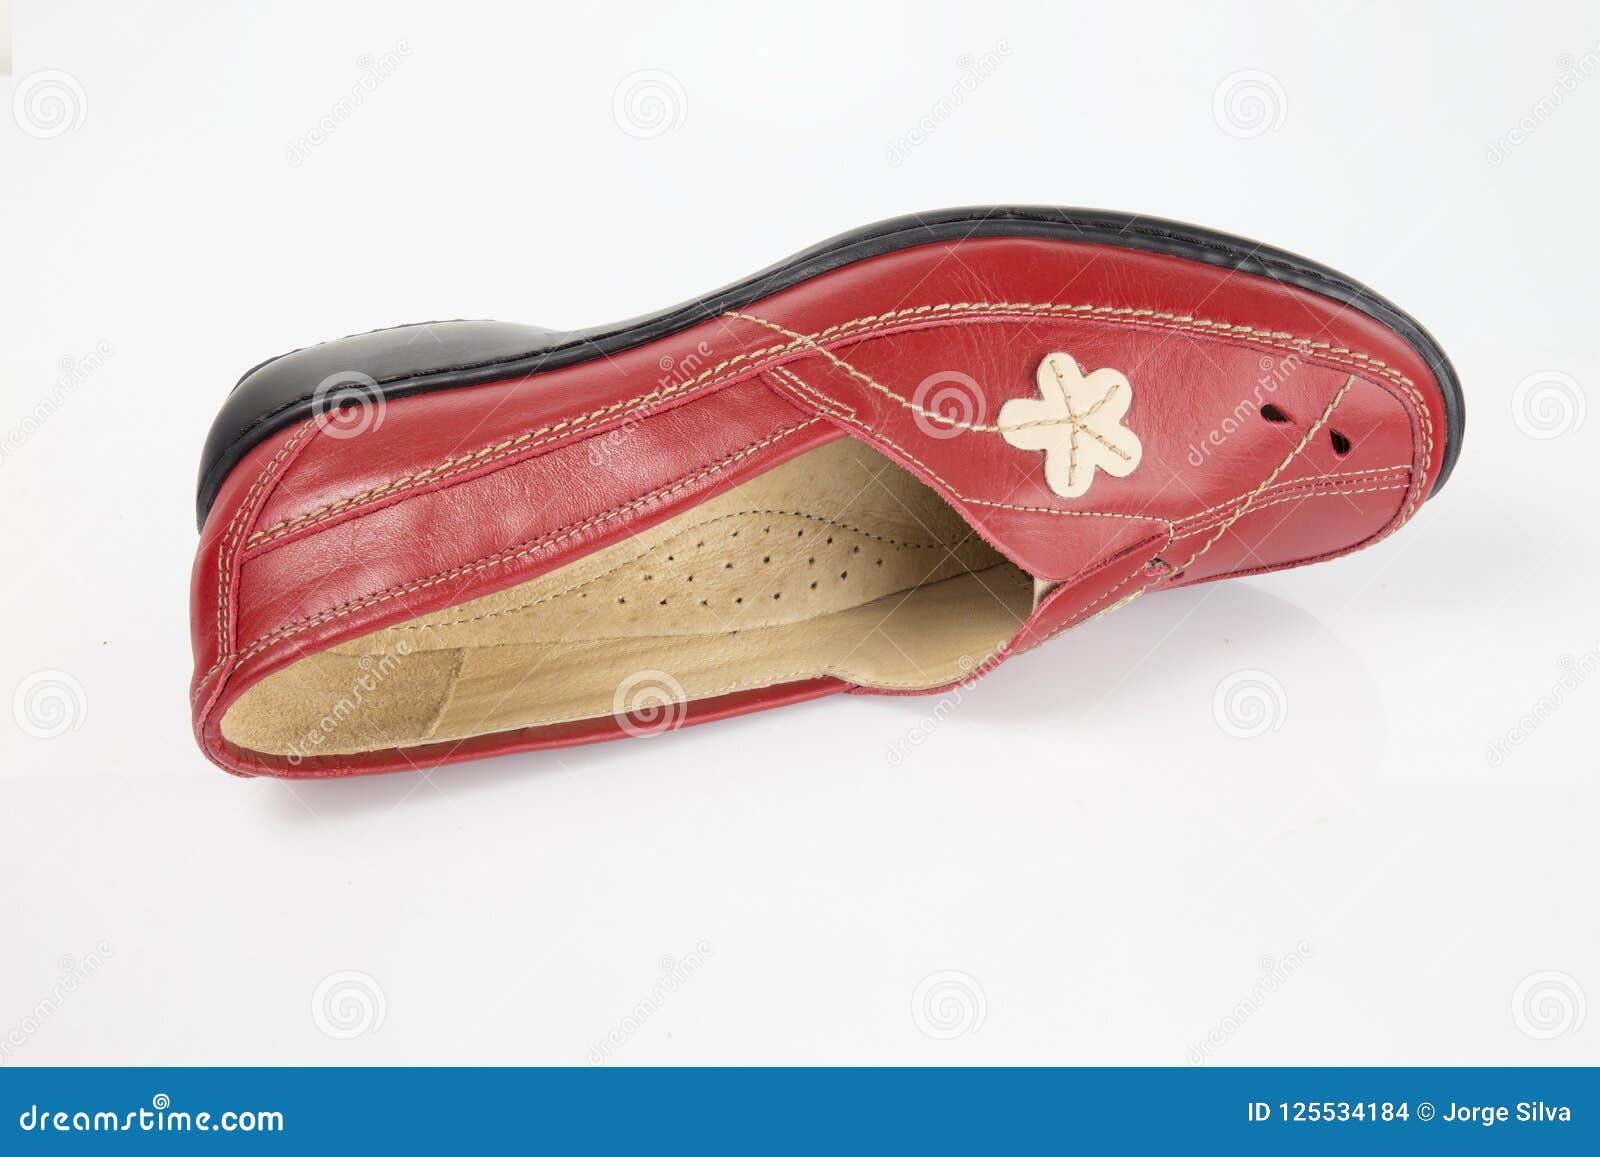 Red shoes leather stock photo. Image of accessory, beauty - 125534184